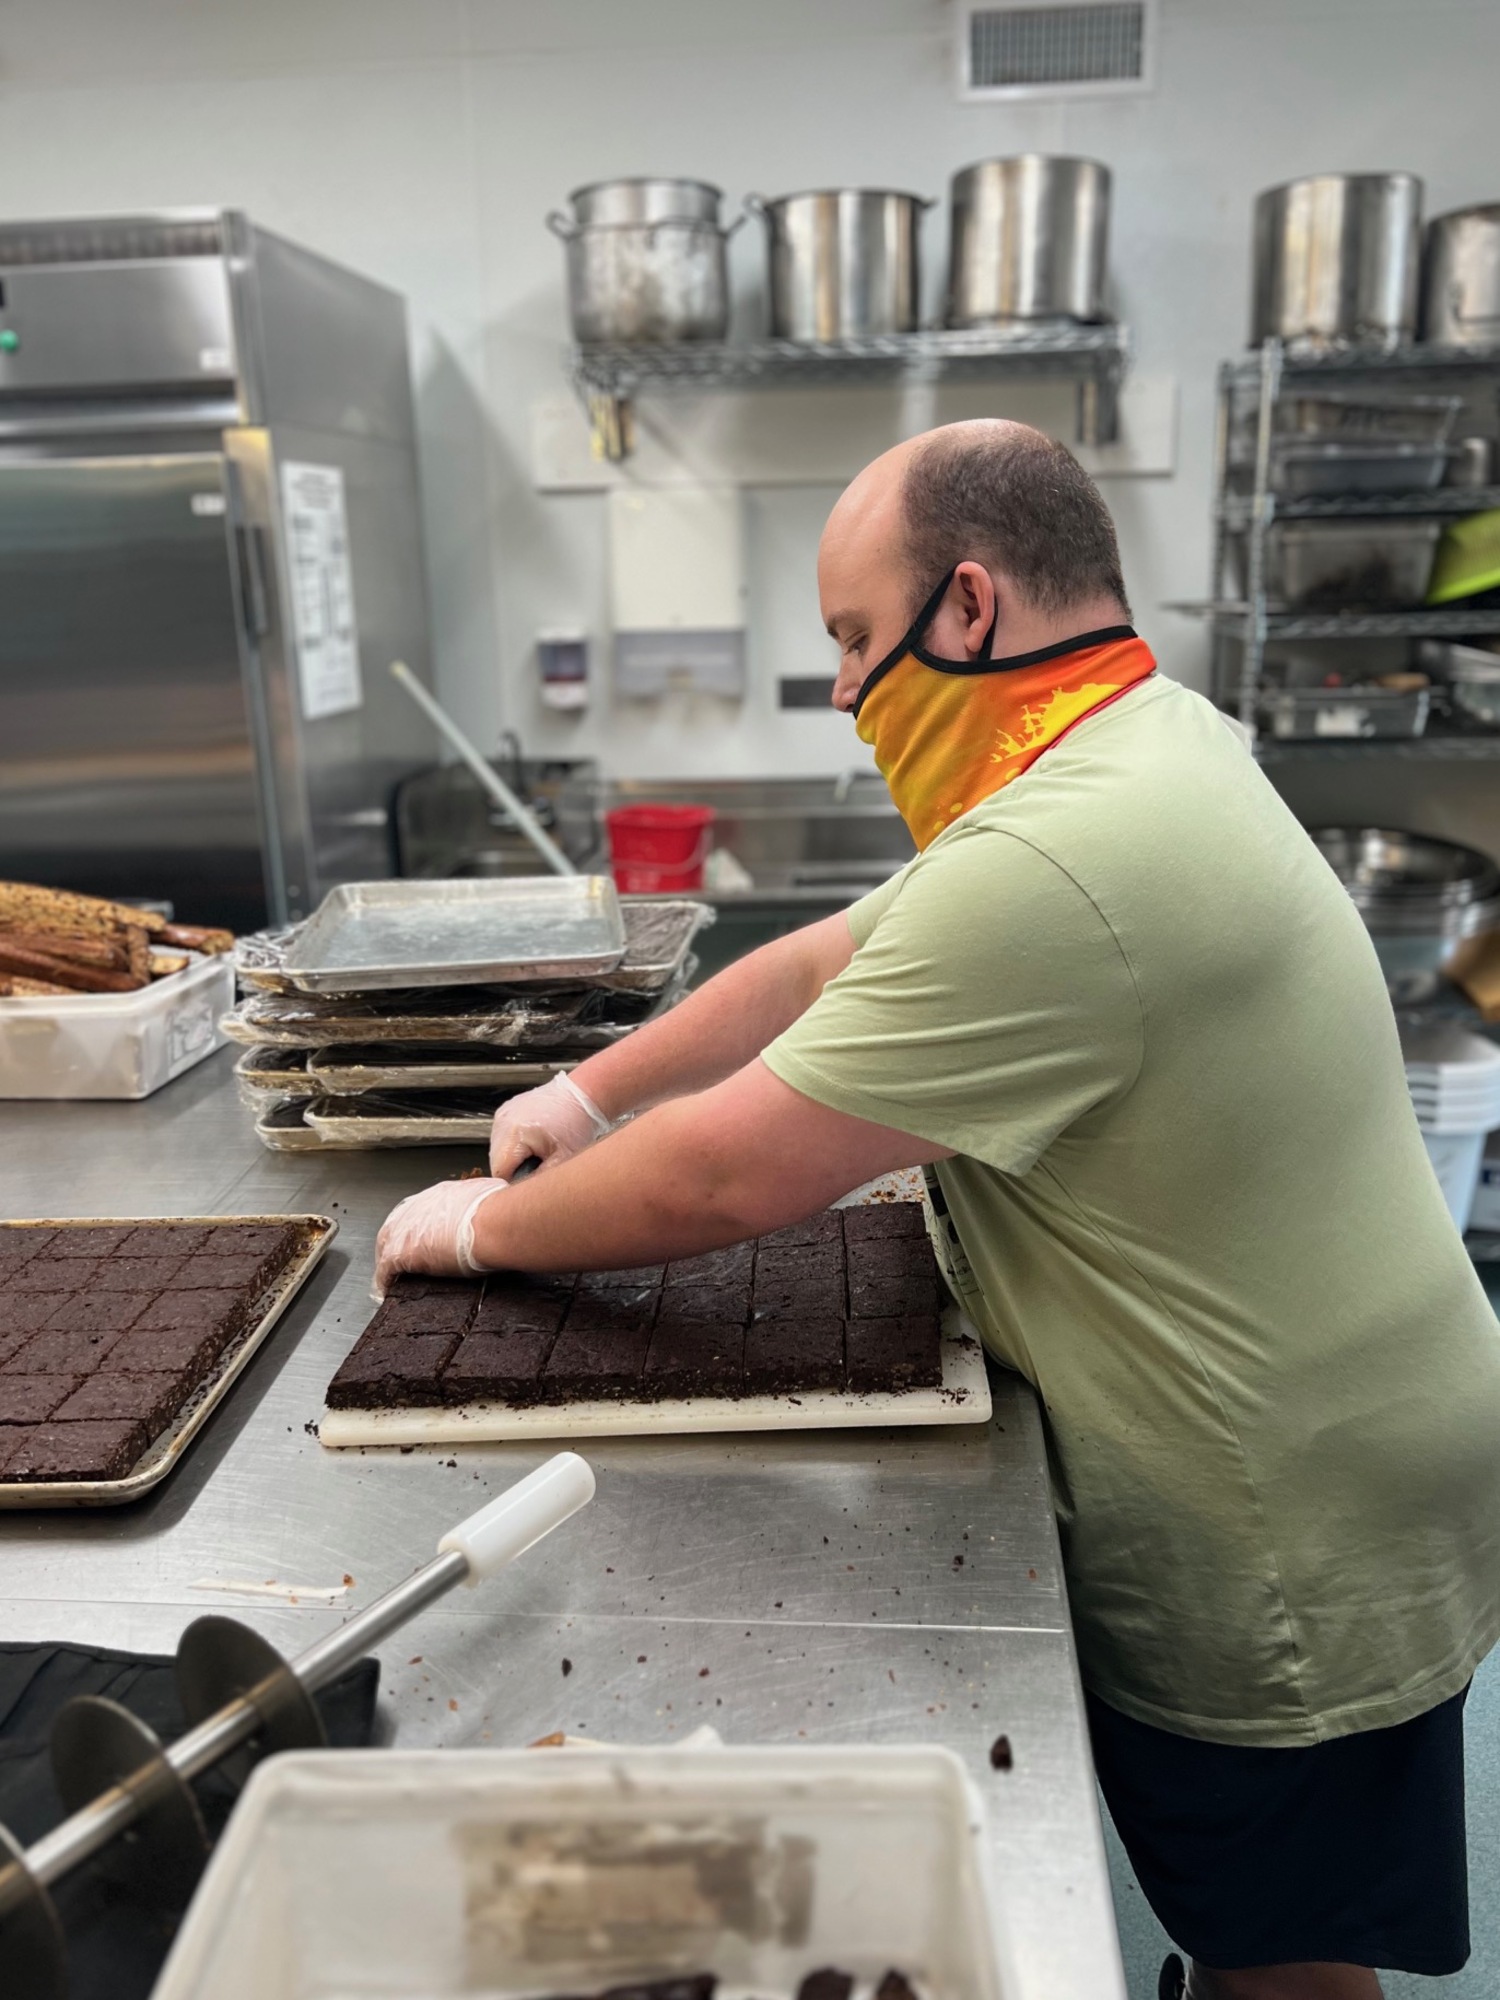 Jon Irwin at working with brownies in the South Fork Bakery kitchen. SOUTH FORK BAKERY